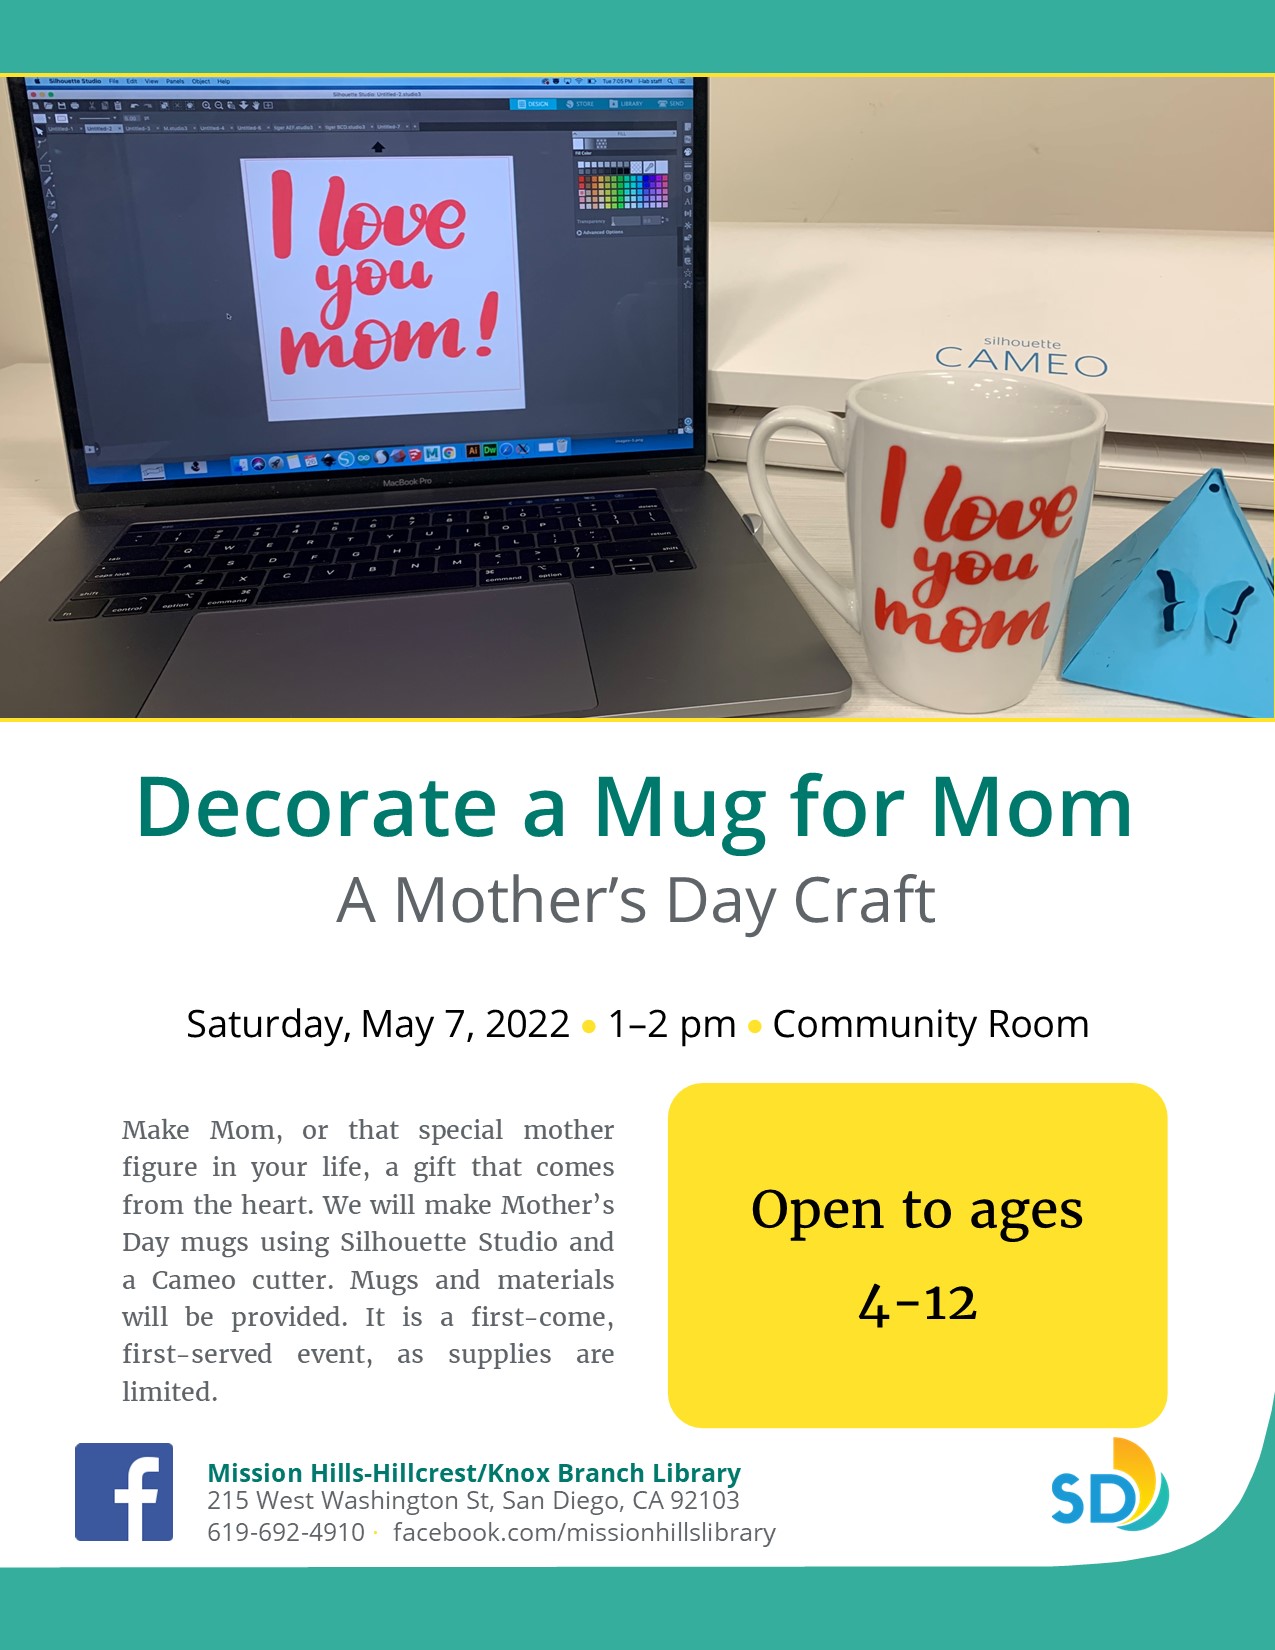 mothers day flyer